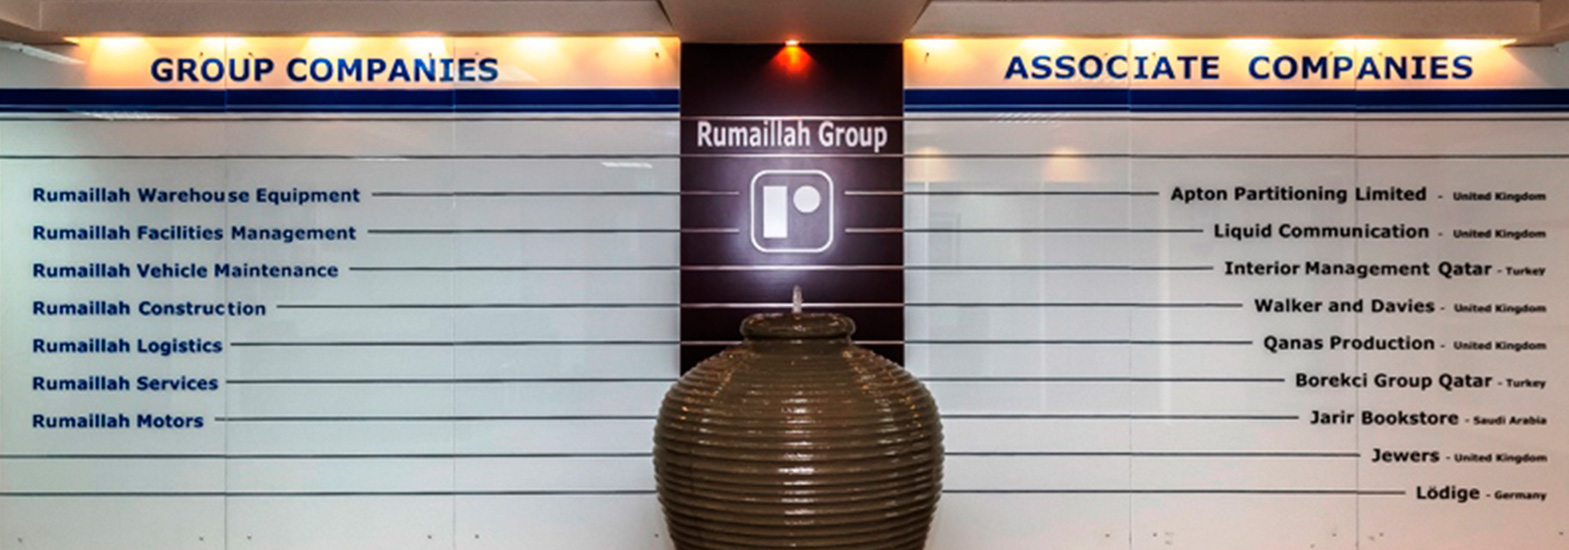 Rumaillah group blinds,carpets,interiors, wall coverings and services